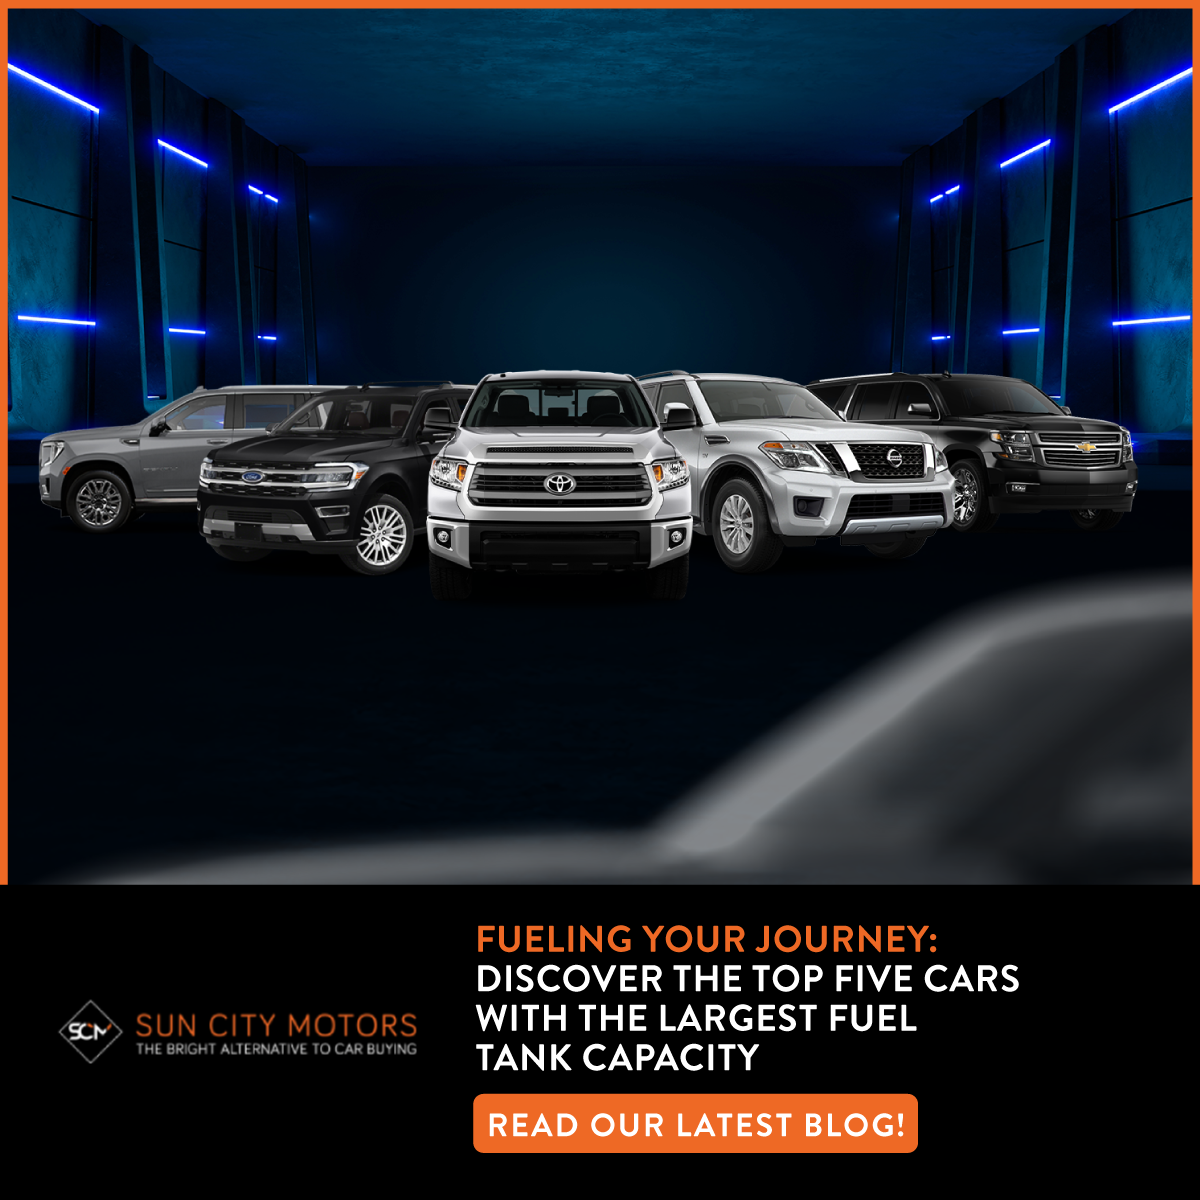 Fueling Your Journey: Discover the Top Five Cars with the Largest Fuel Tank Capacity in the UAE